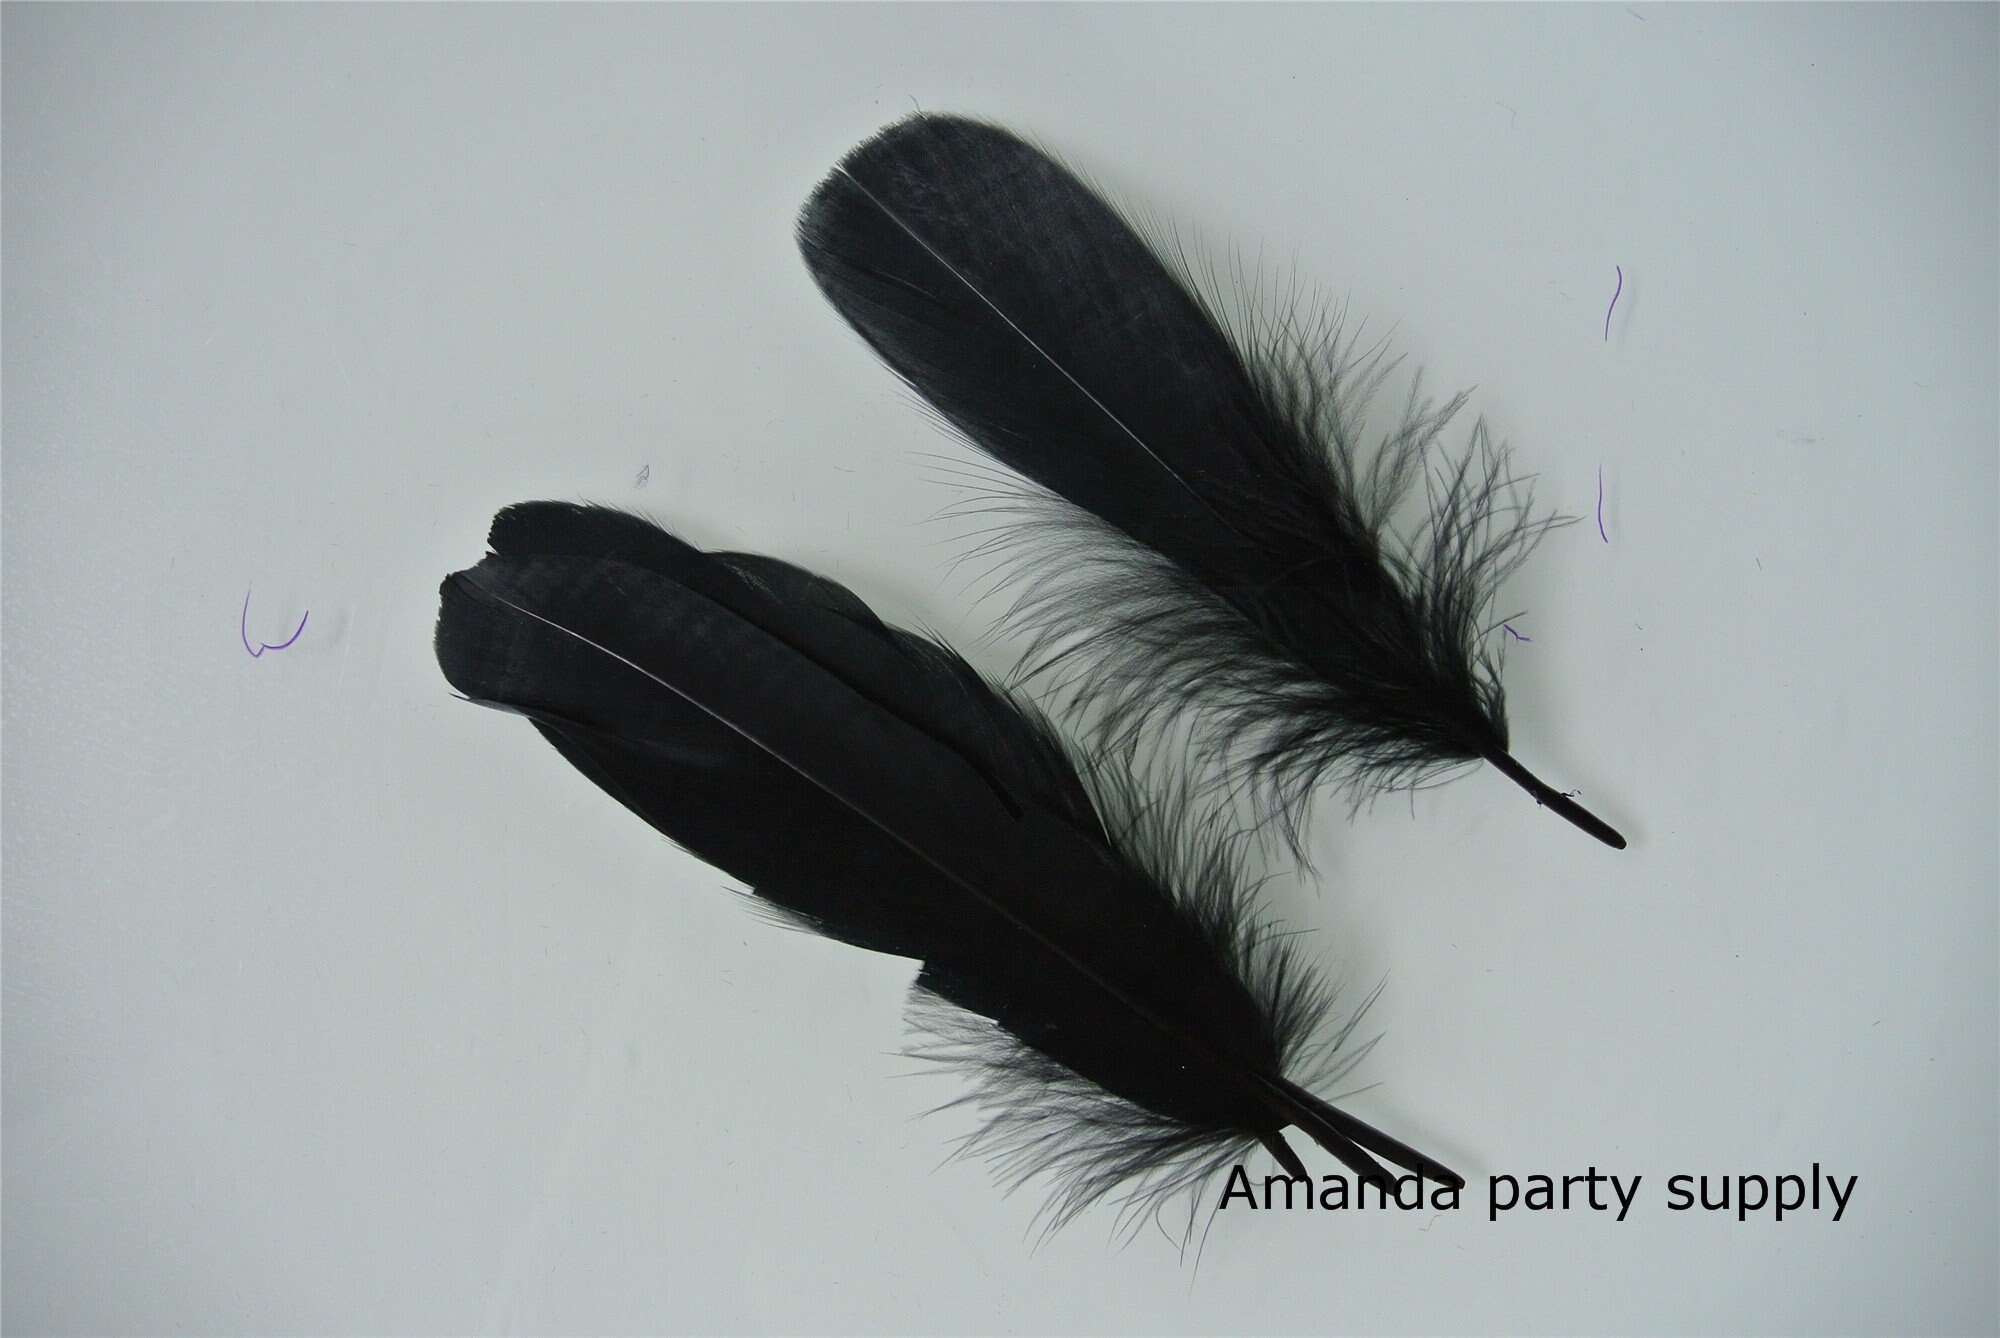 Black Quill Feathers by the Pound